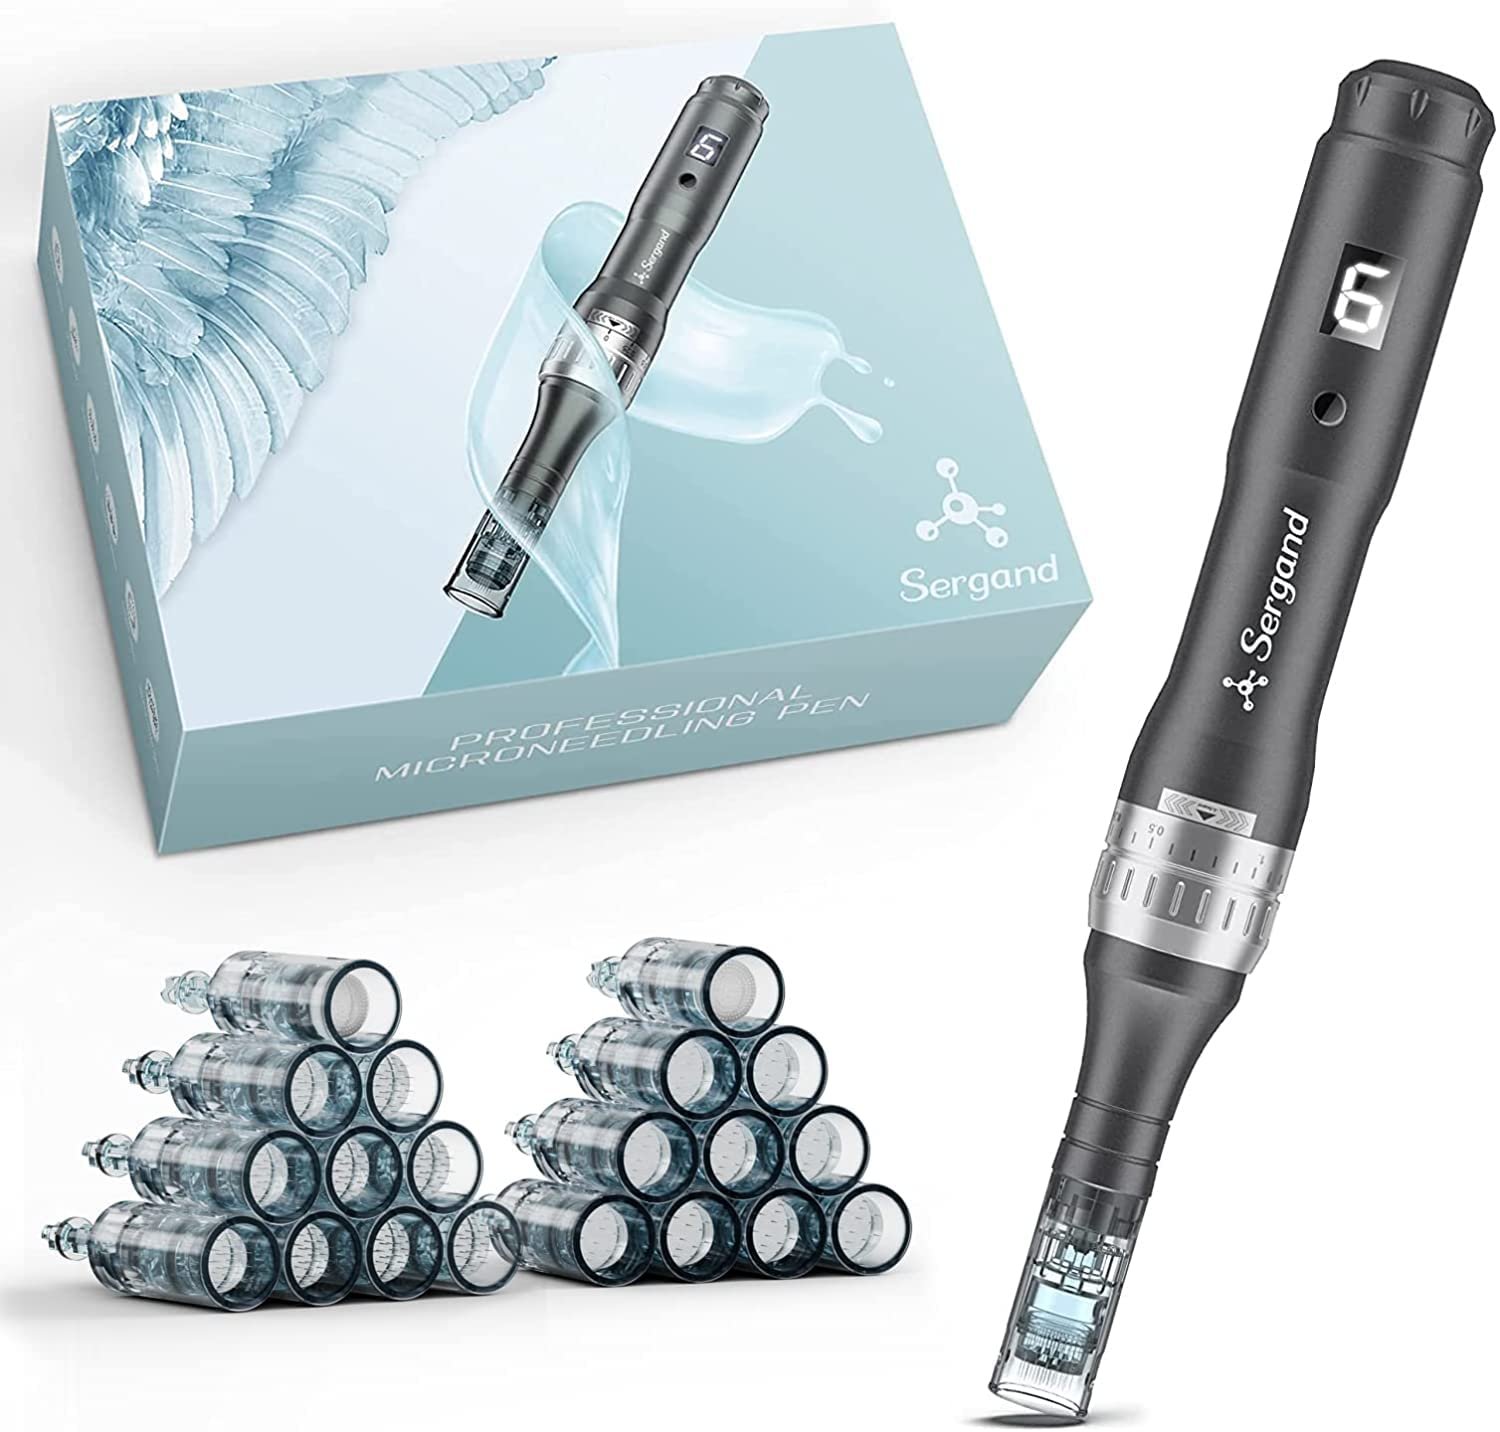 How to Use Microneedling Pen?